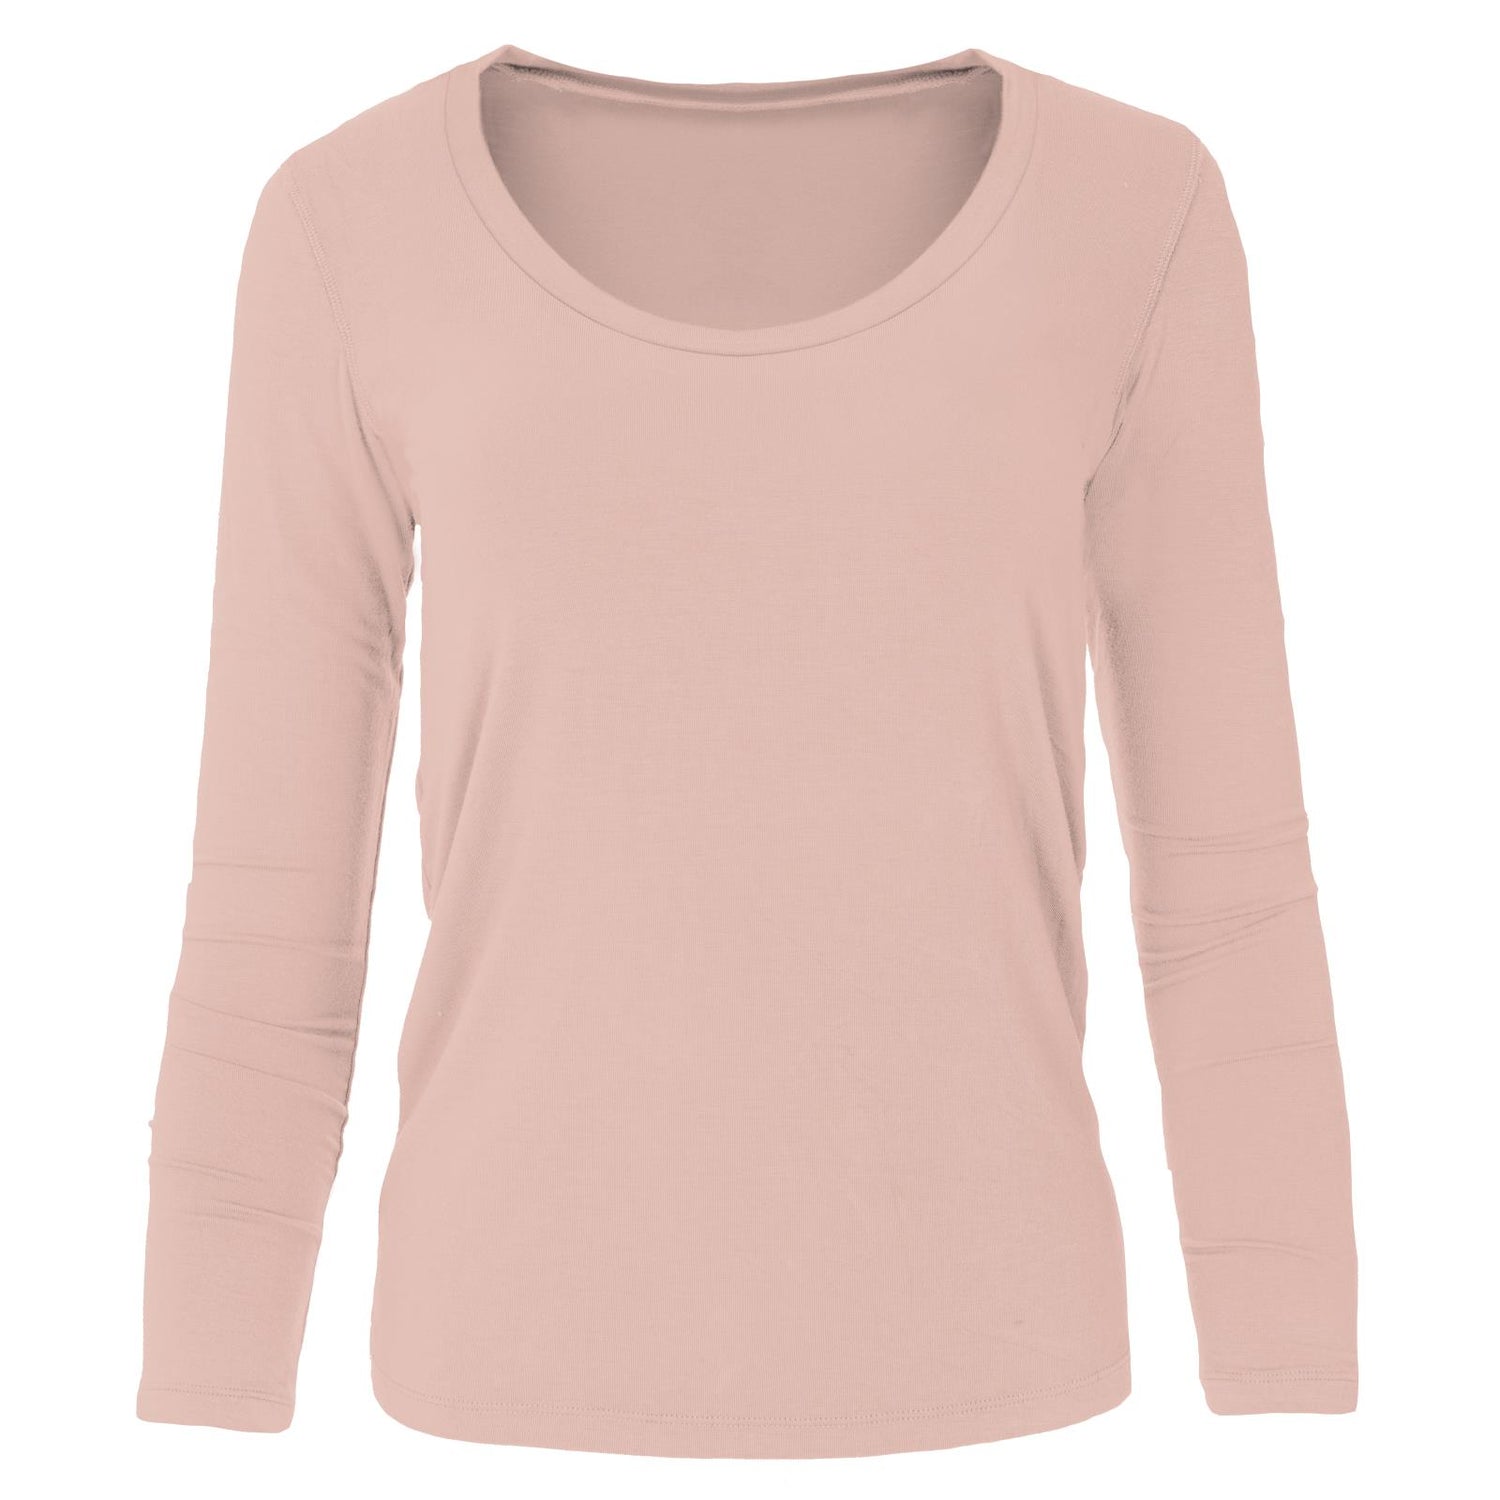 Women's Solid Long Sleeve Scoop Neck Tee in Peach Blossom